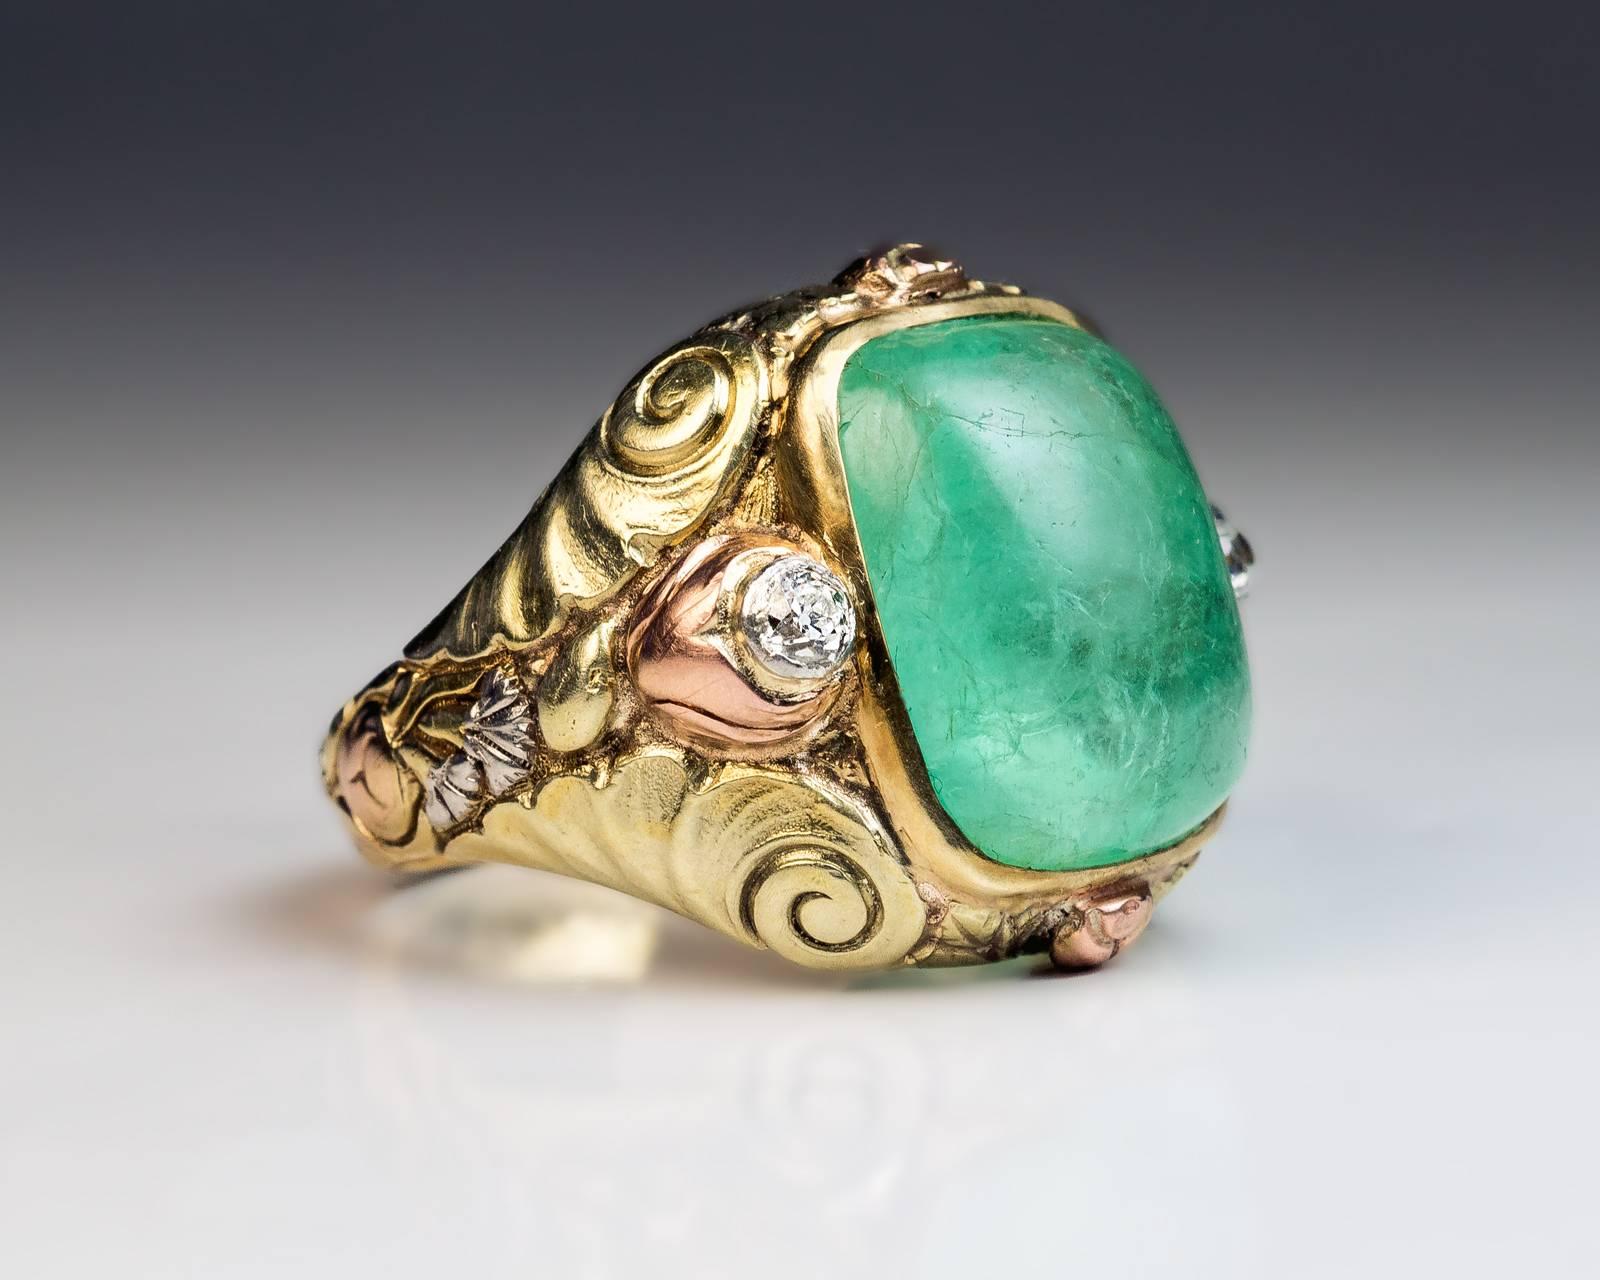 A vari-color gold ring with superbly carved stylized floral designs in Art Nouveau taste bezel-set with a sugar loaf emerald (16 x 13.5 x 8.85 mm, approximately 14.30 ct) flanked by two old European cut diamonds.

The engraved inscription inside